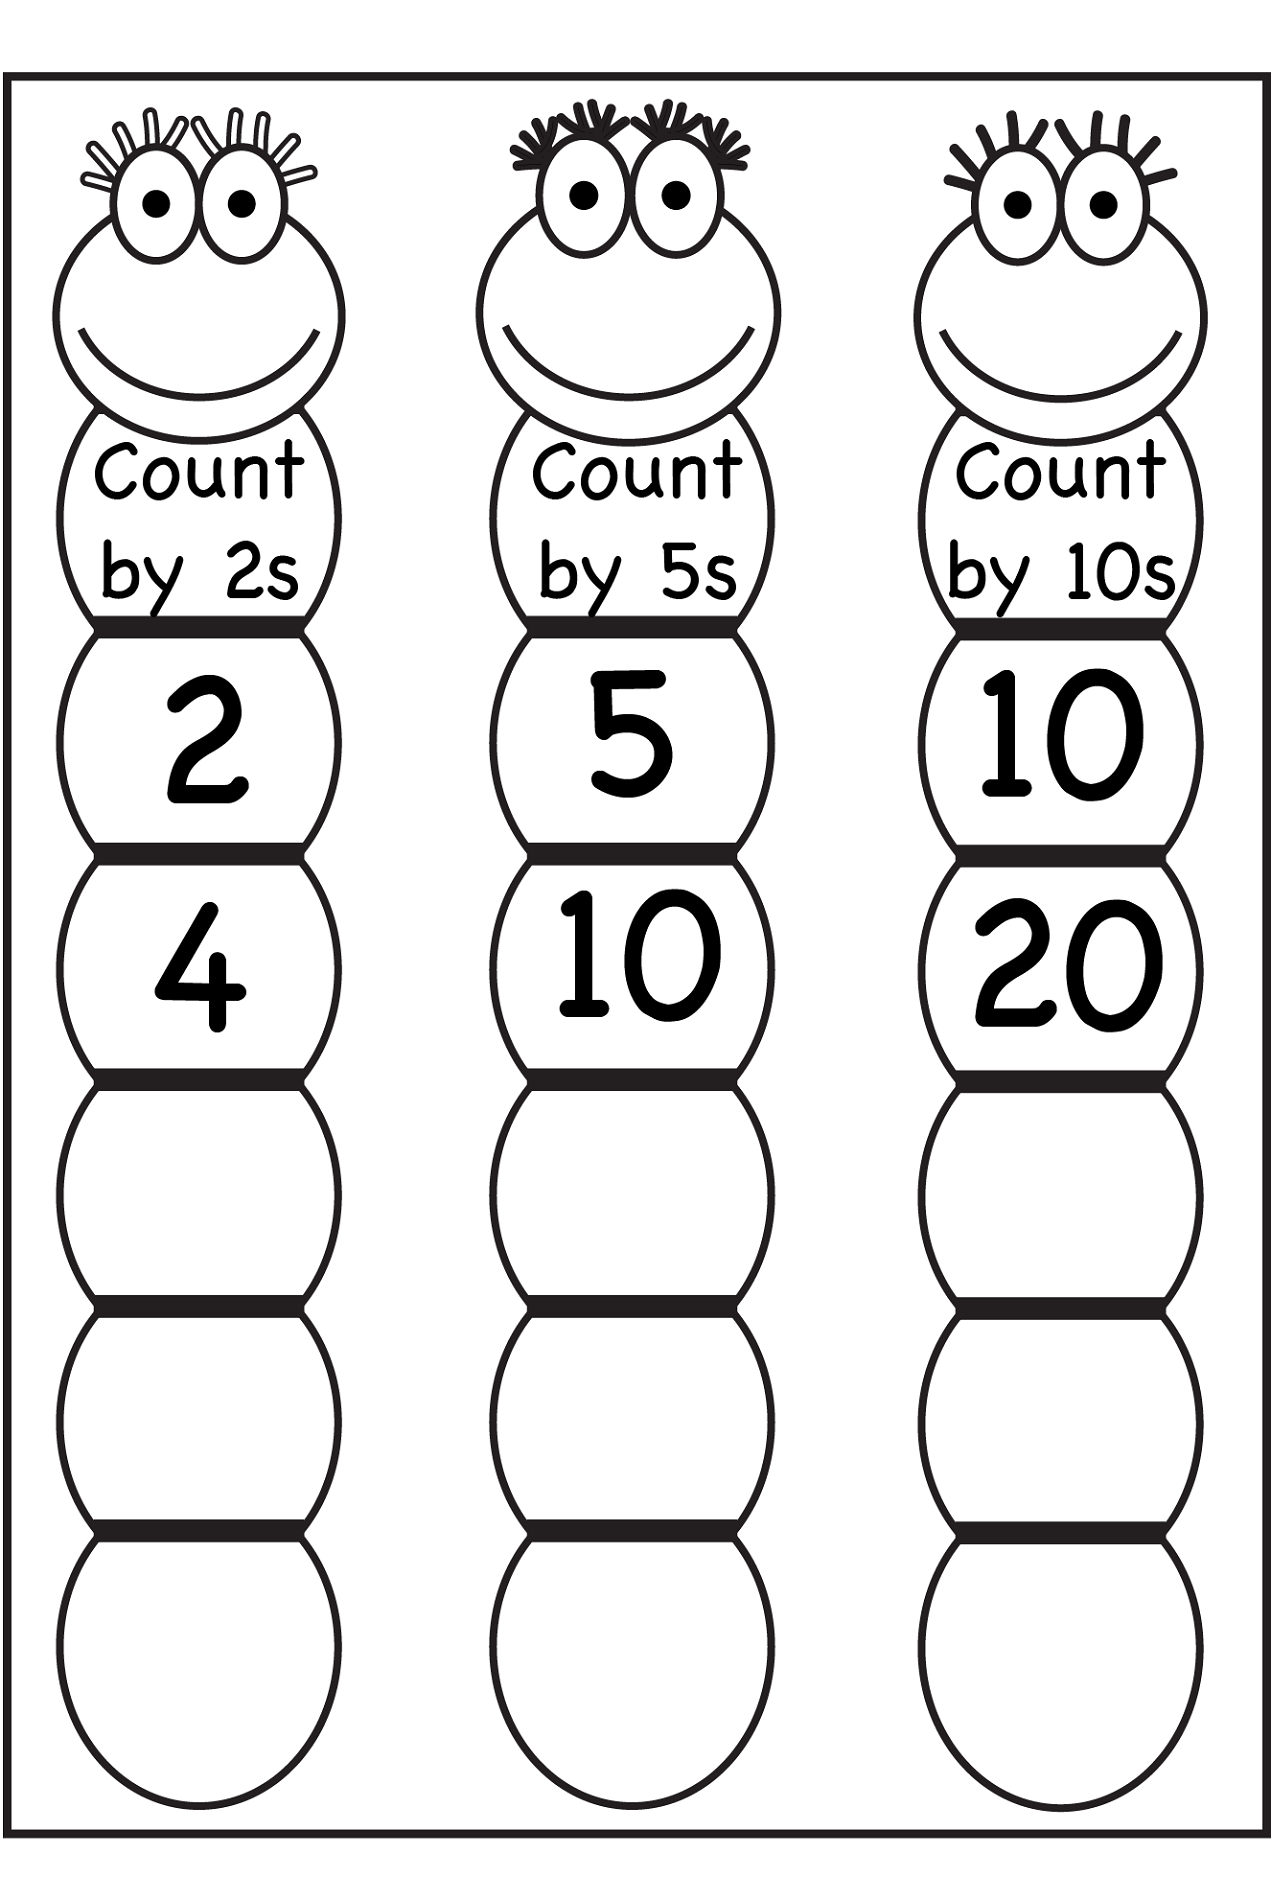 Free Printable Count By 5 Worksheets